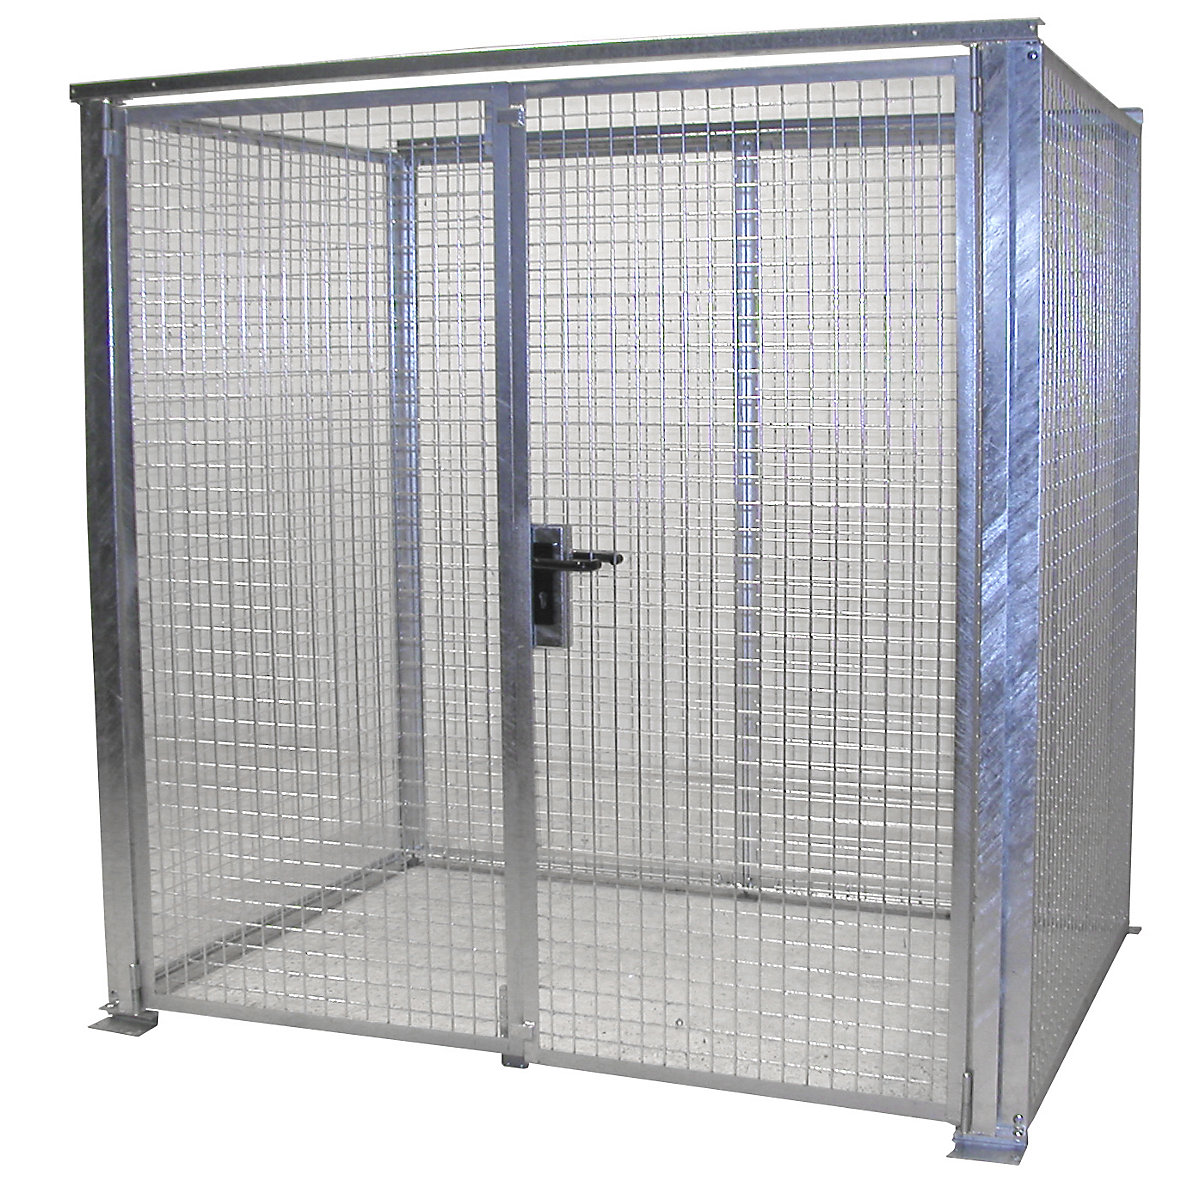 EUROKRAFTpro – Mesh gas cylinder cage, without roof, with double hinged doors, WxD 2100 x 1500 mm